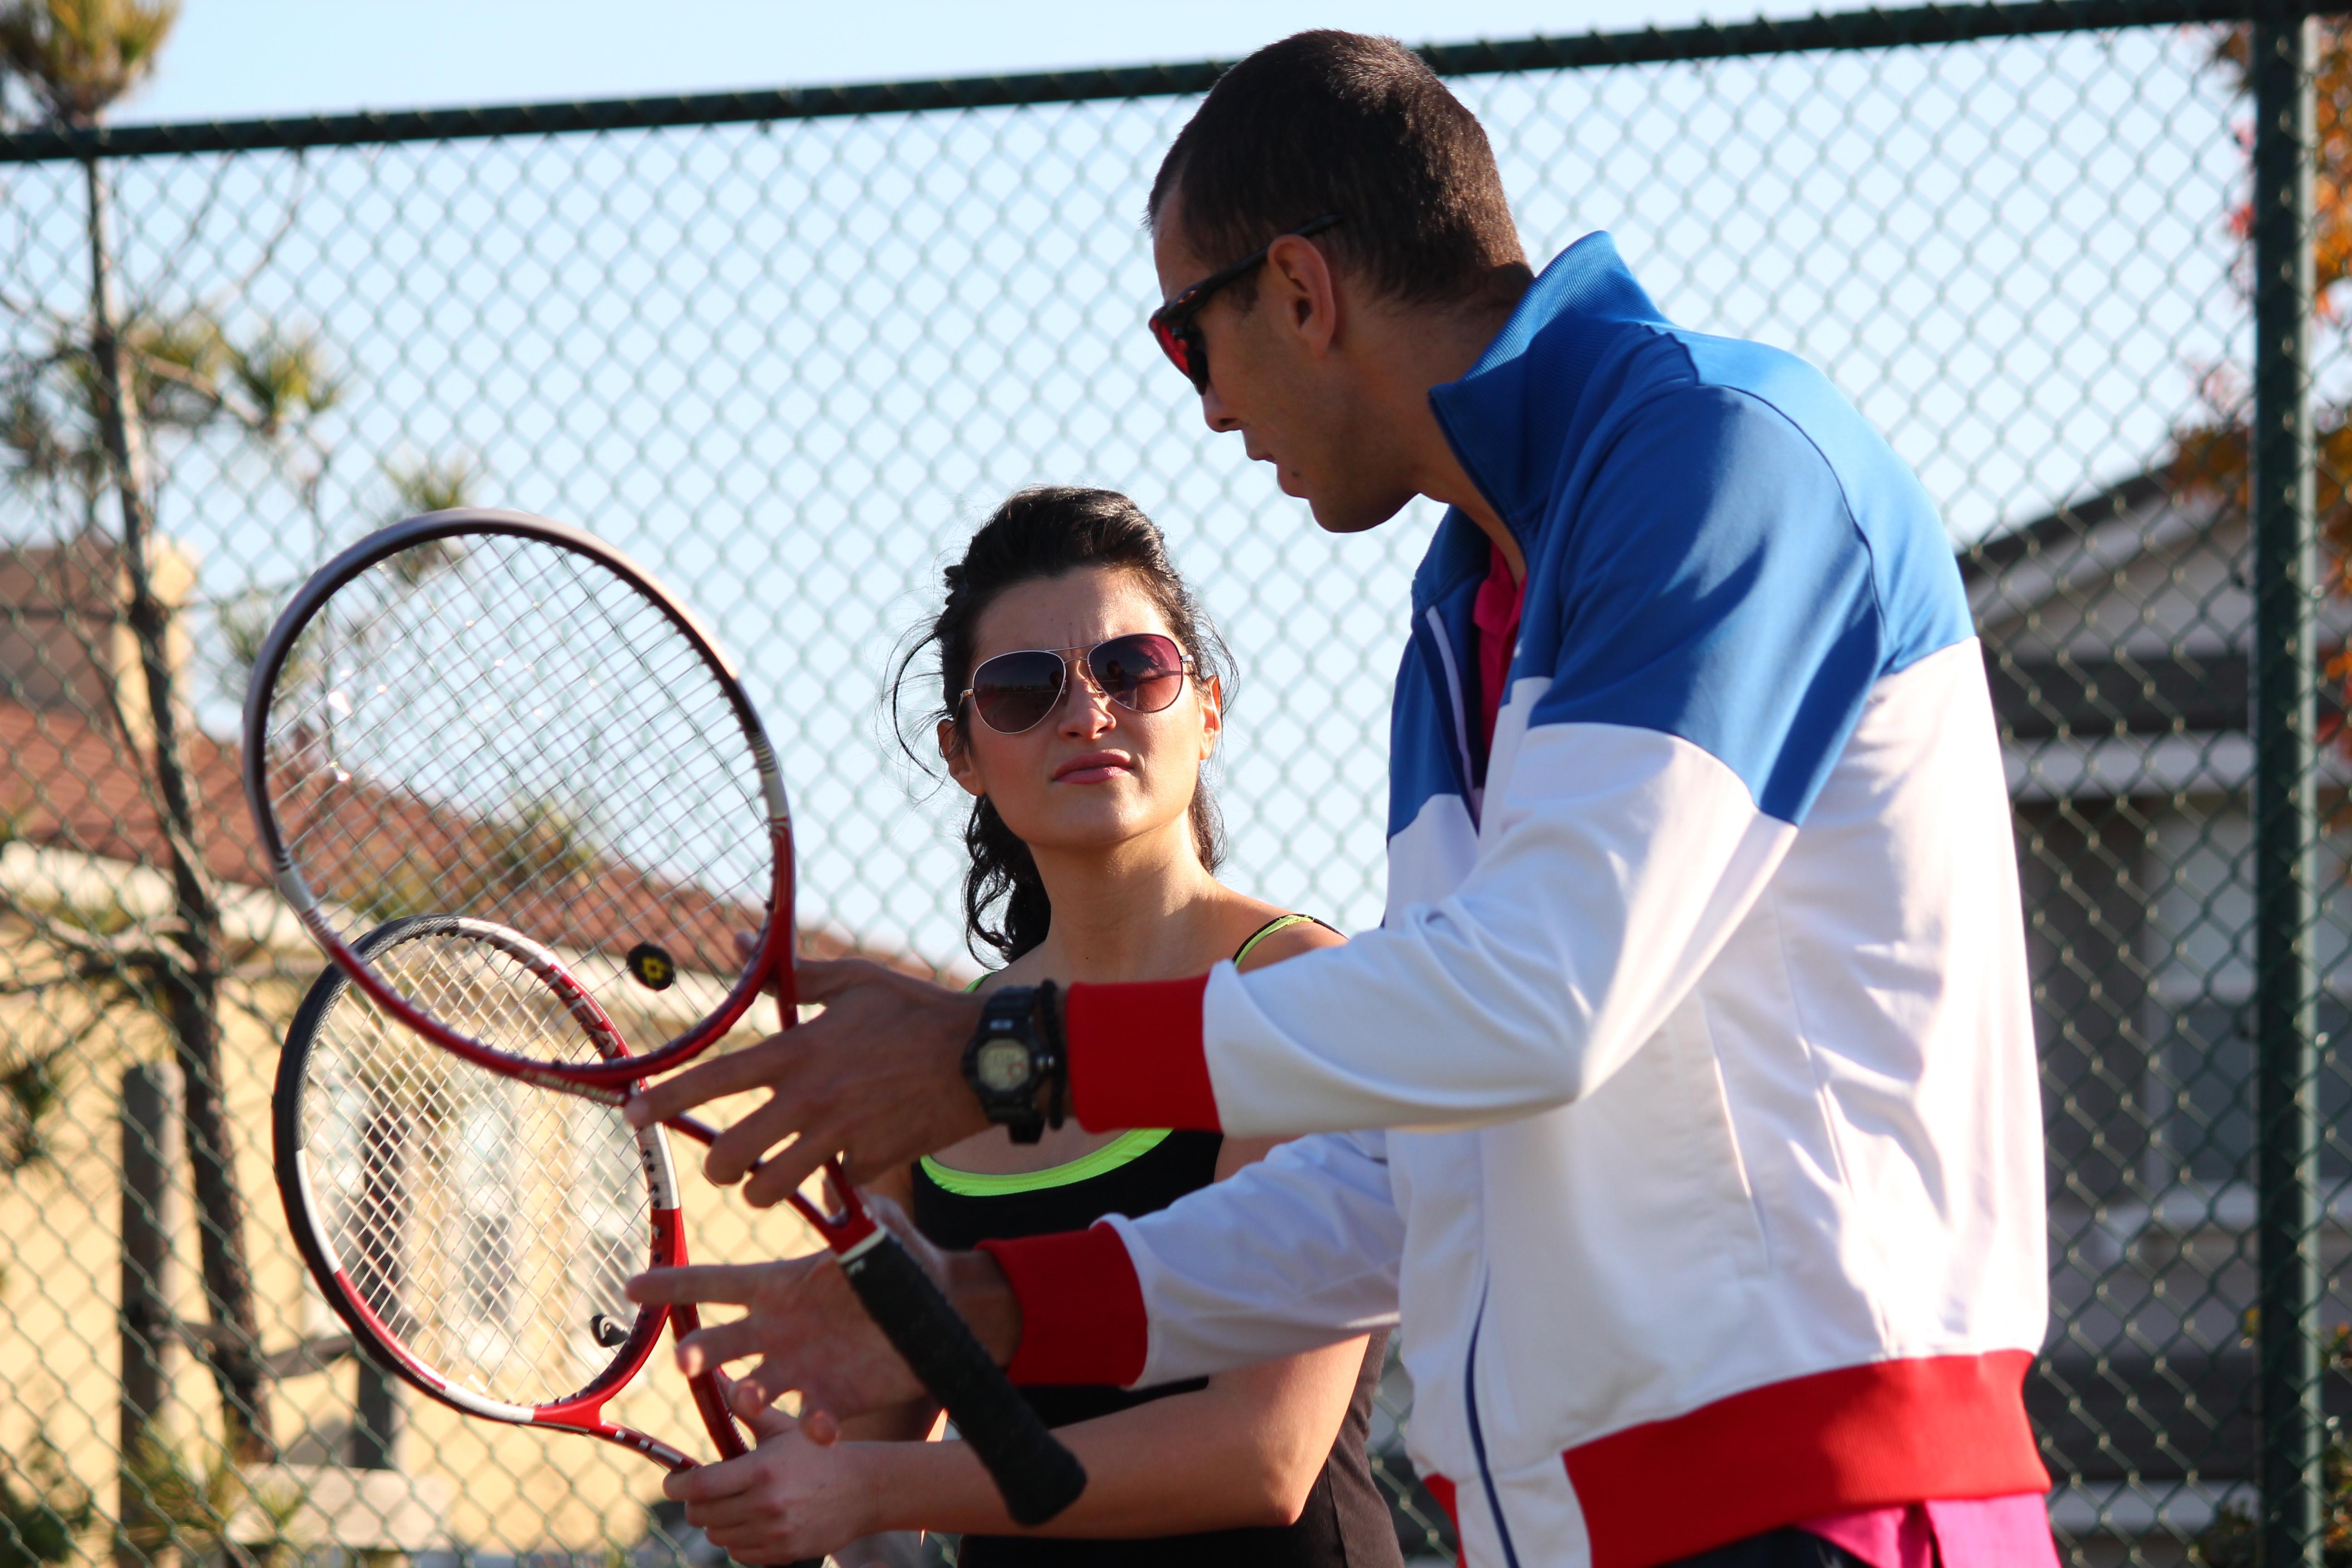 Adult Tennis Classes in Fremont (Novice Ages 15+)